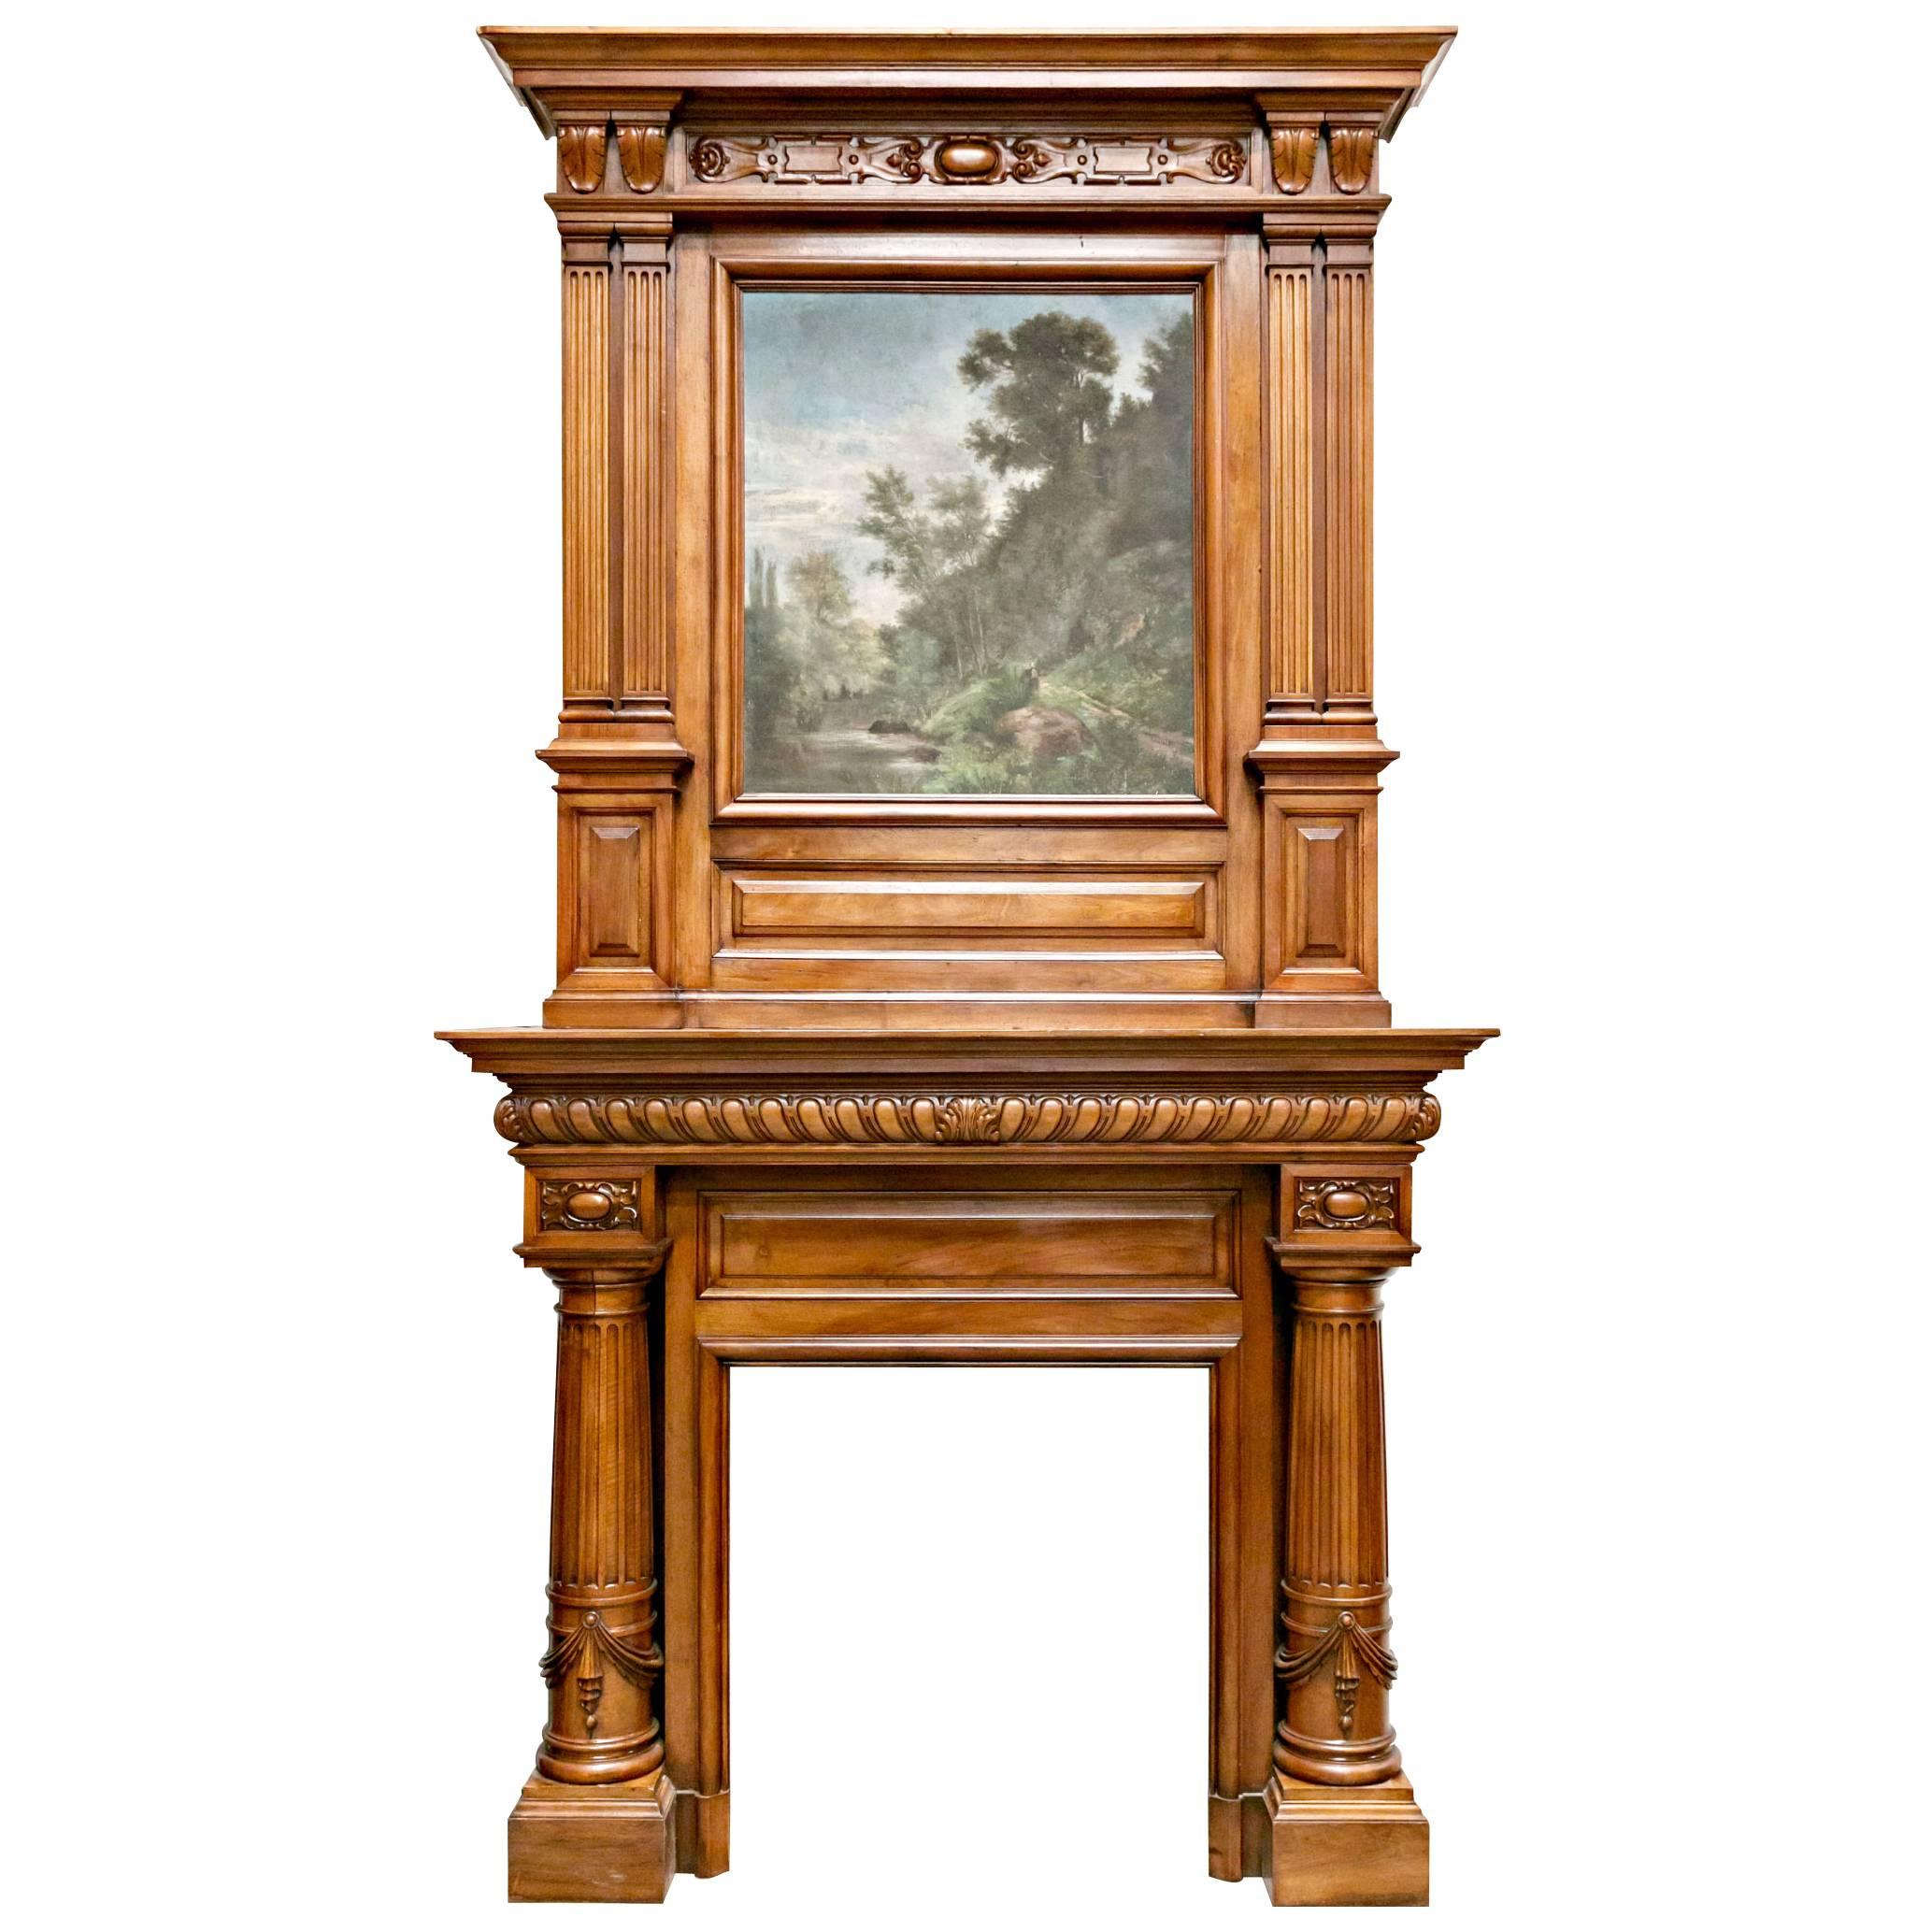 Monumental French Renaissance Revival Walnut Fireplace with Trumeau Overmantel